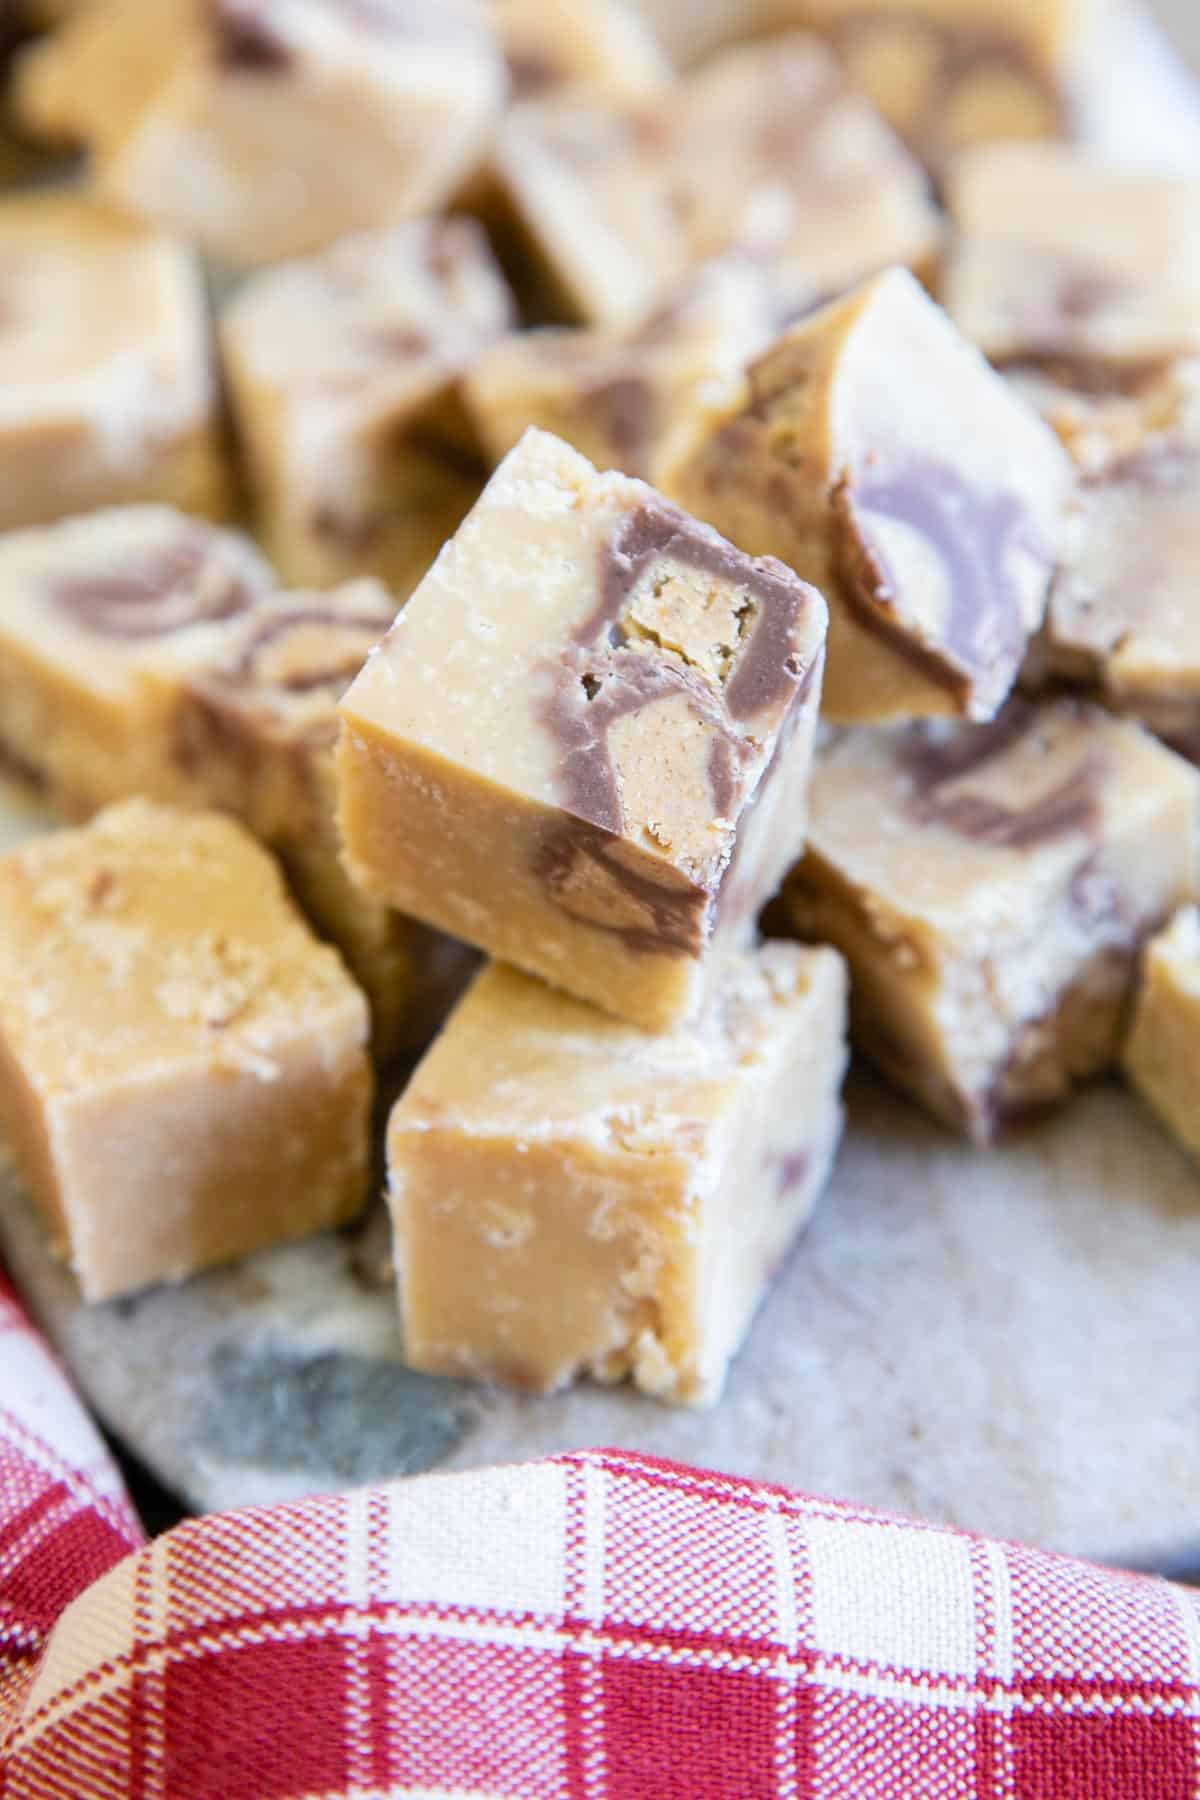 Mouthwatering chunks of peanut butter fudge with a chocolate swirl.